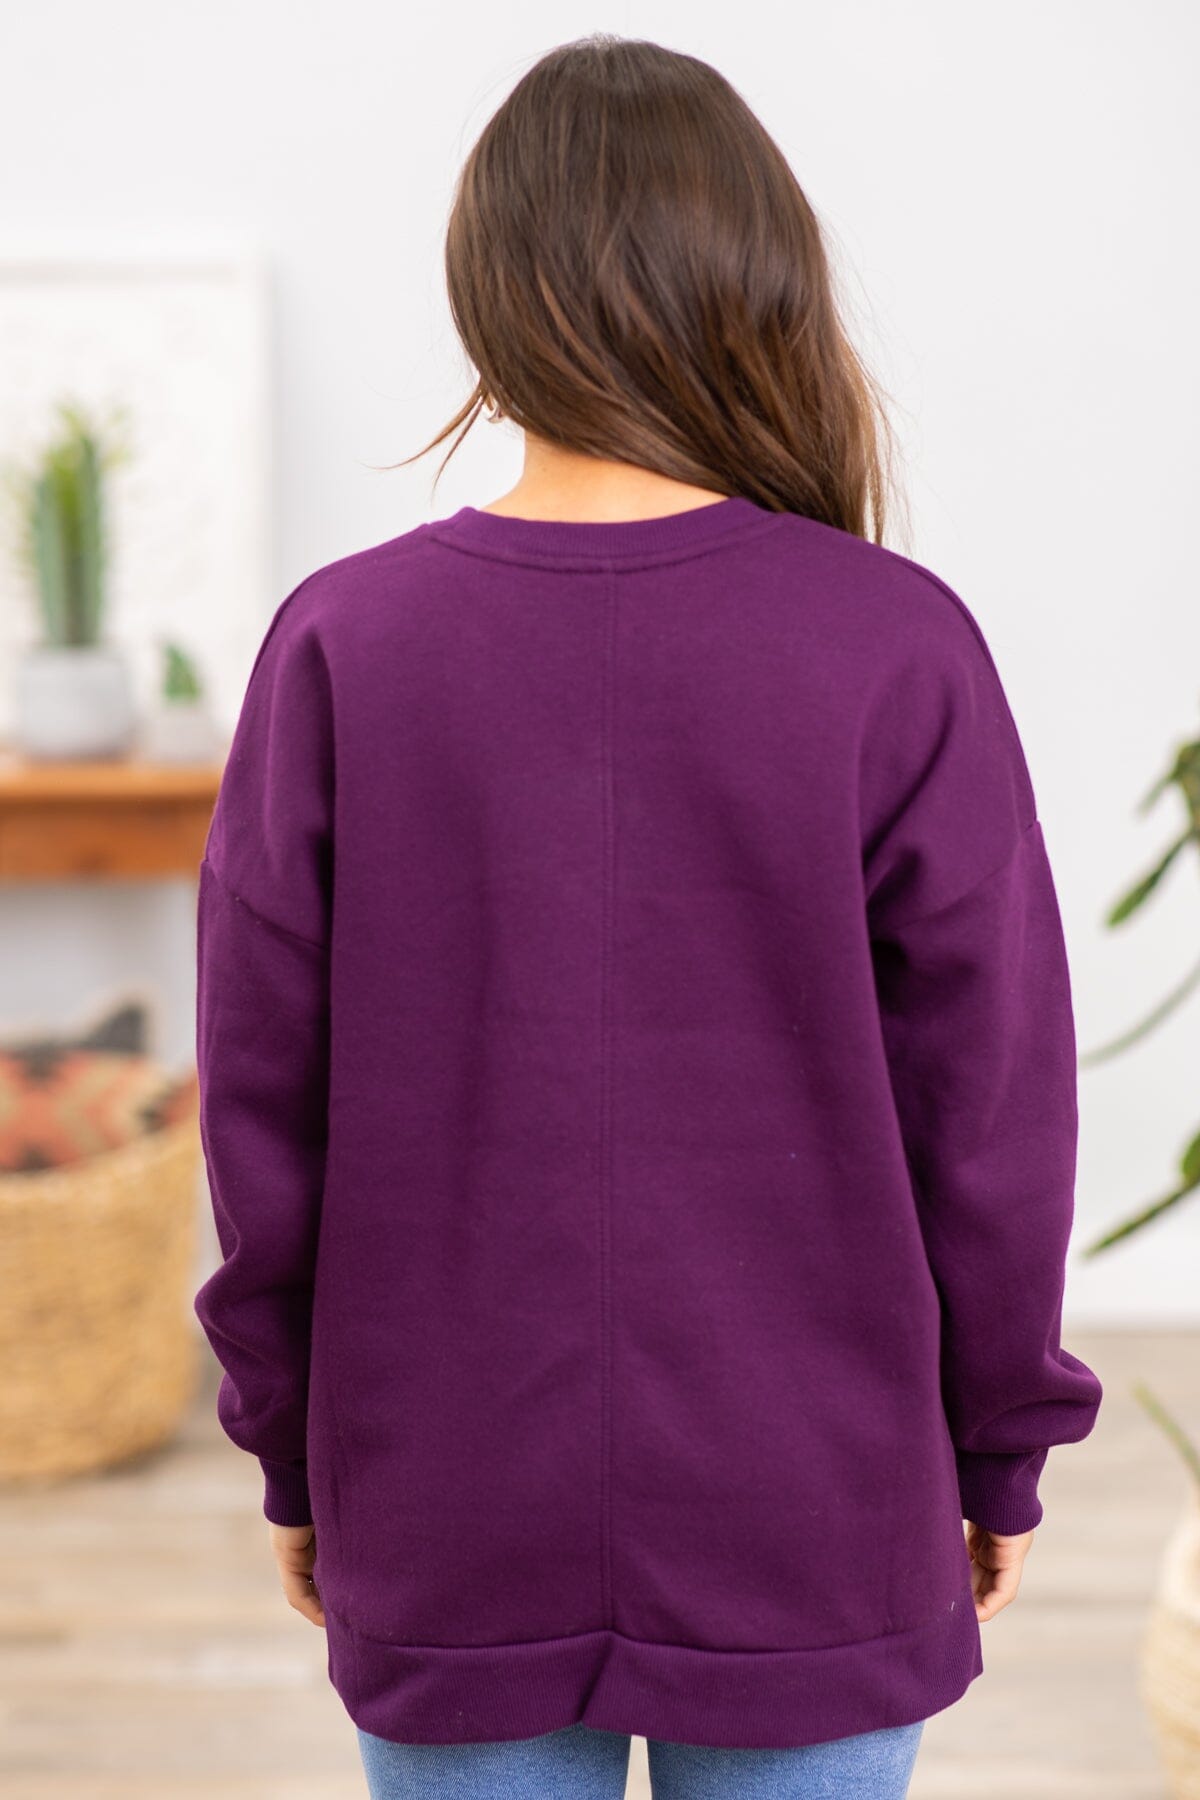 Eggplant Crew Neck Sweatshirt With Pockets - Filly Flair